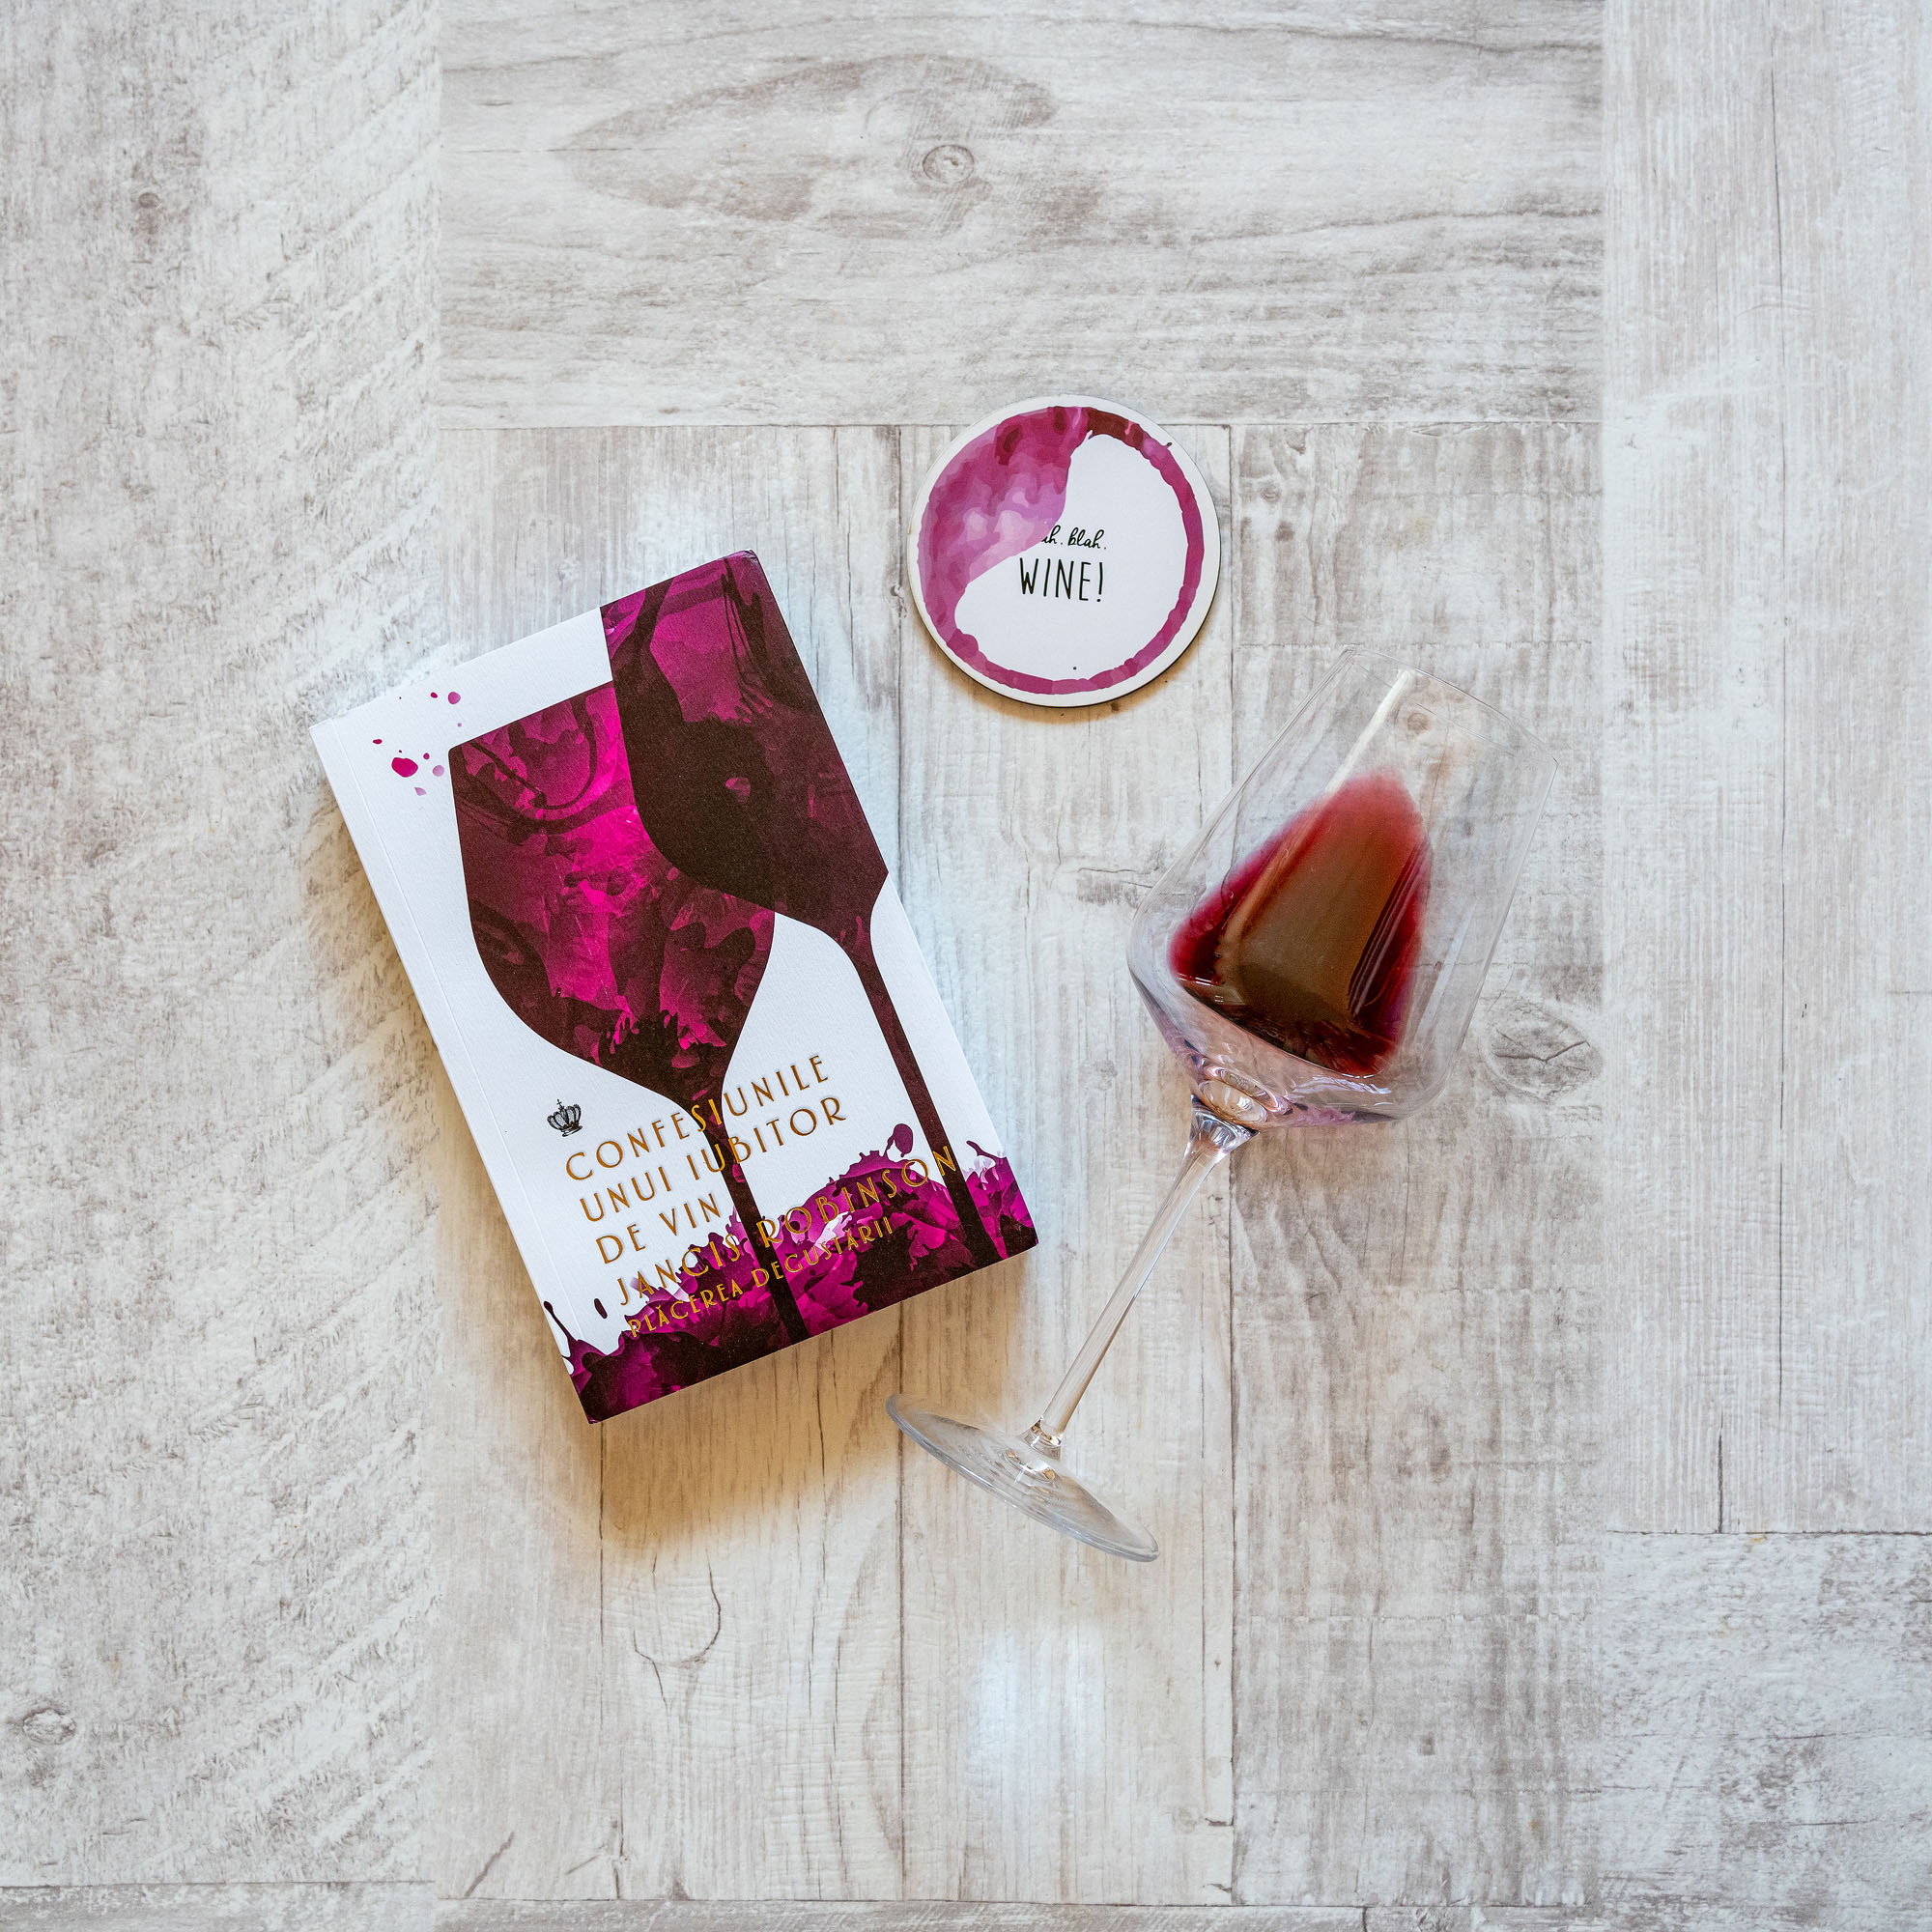 Tasting pleasure. Confessions of a wine lover - Book of the month September 2023